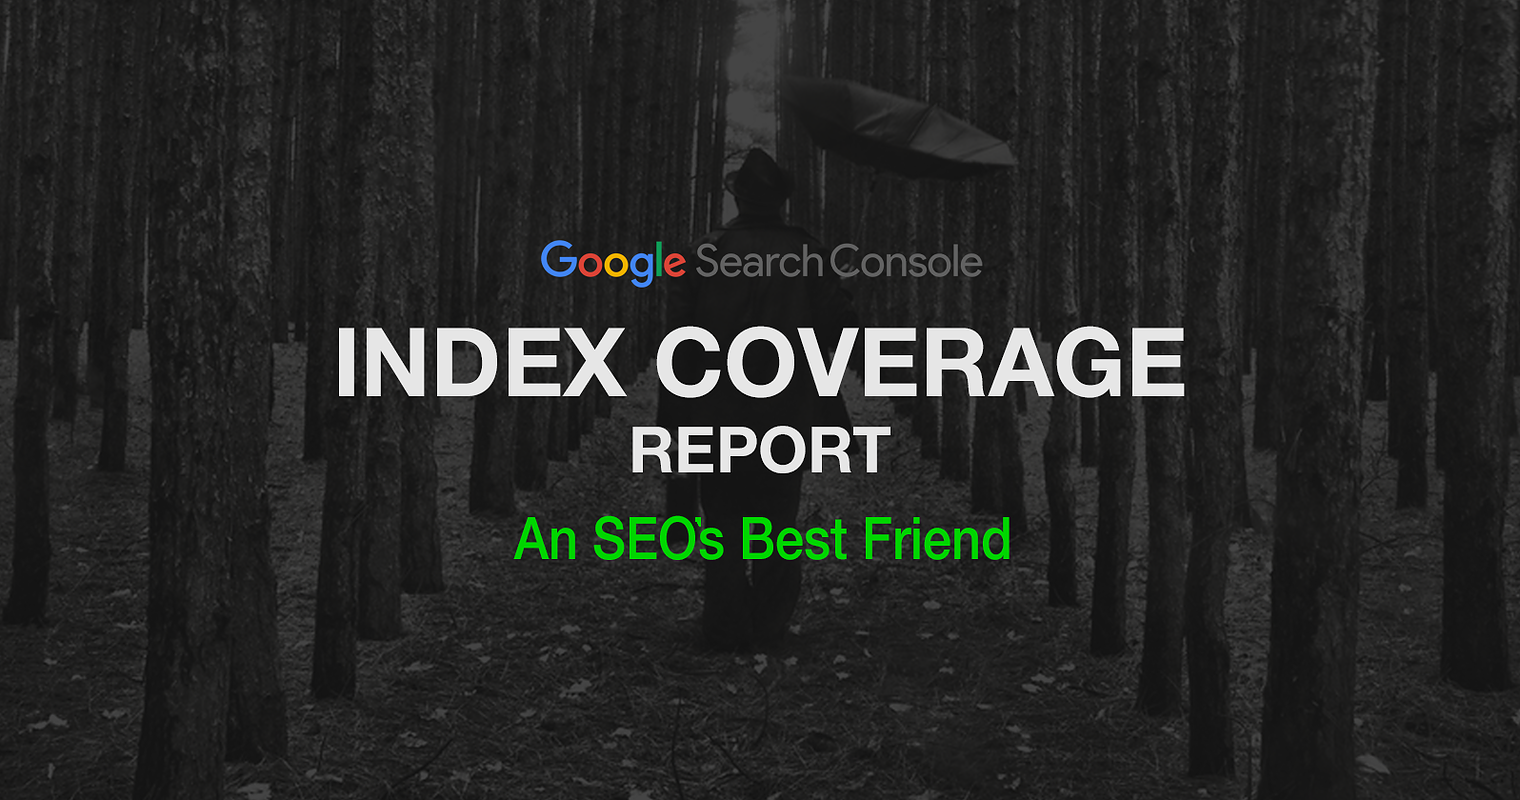 index your site with the coverage report